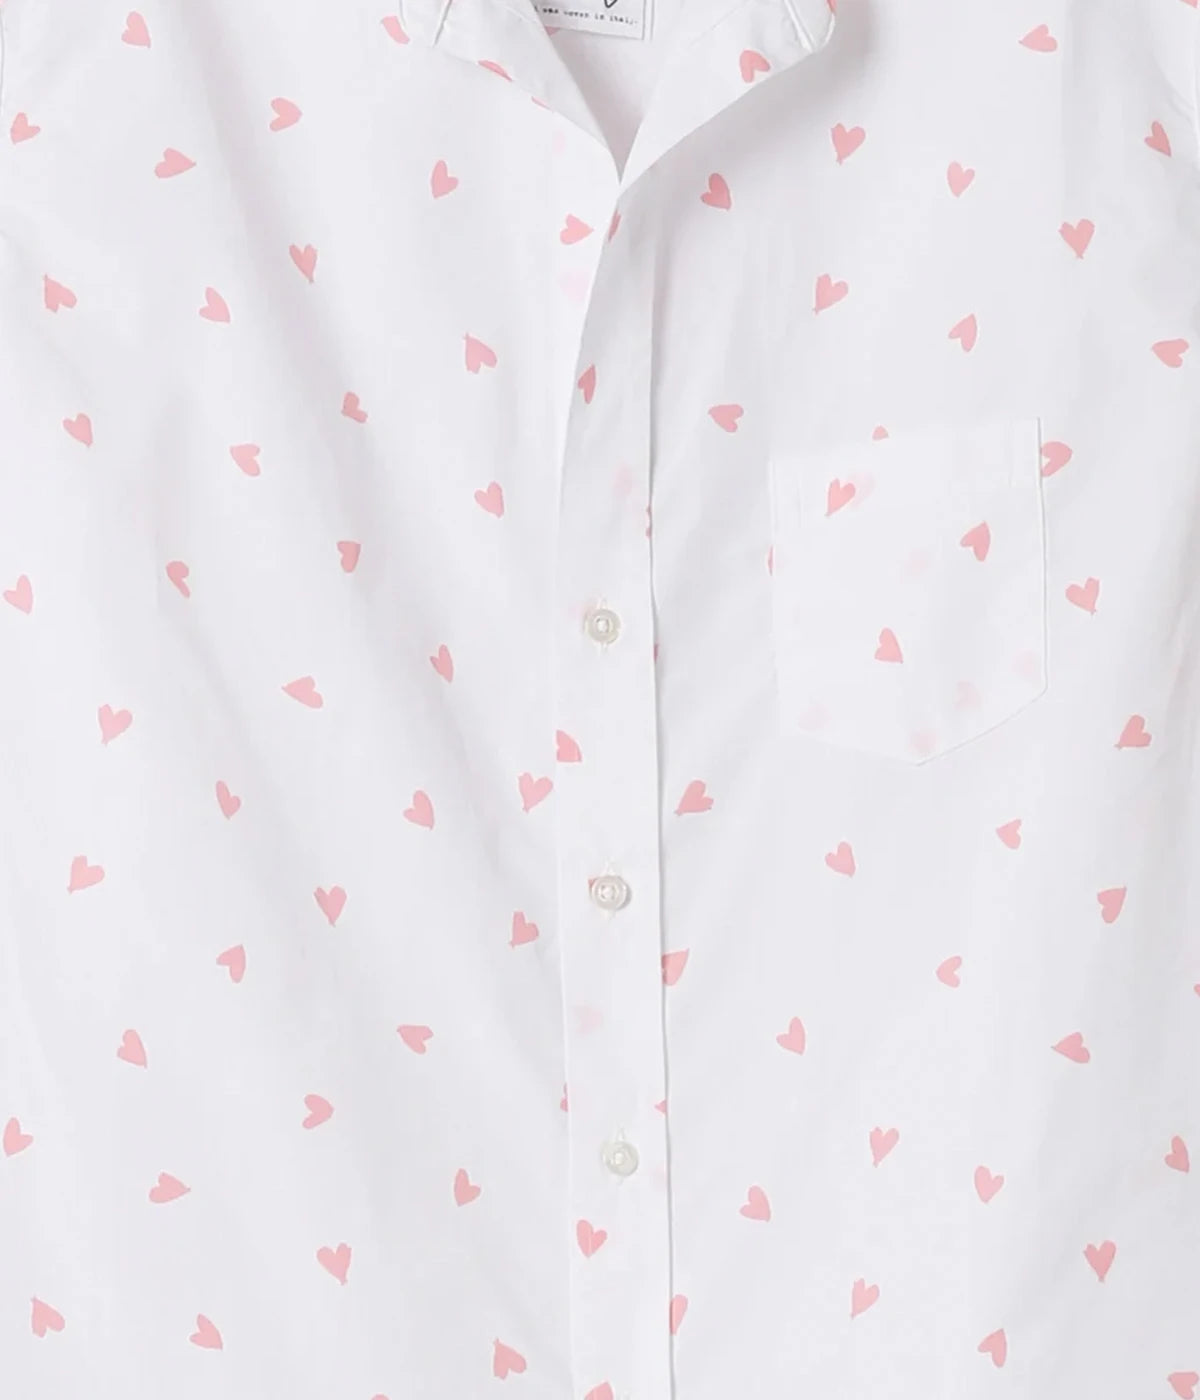 Eileen Relaxed Button Up Shirt in Pink Messy Hearts Cotton